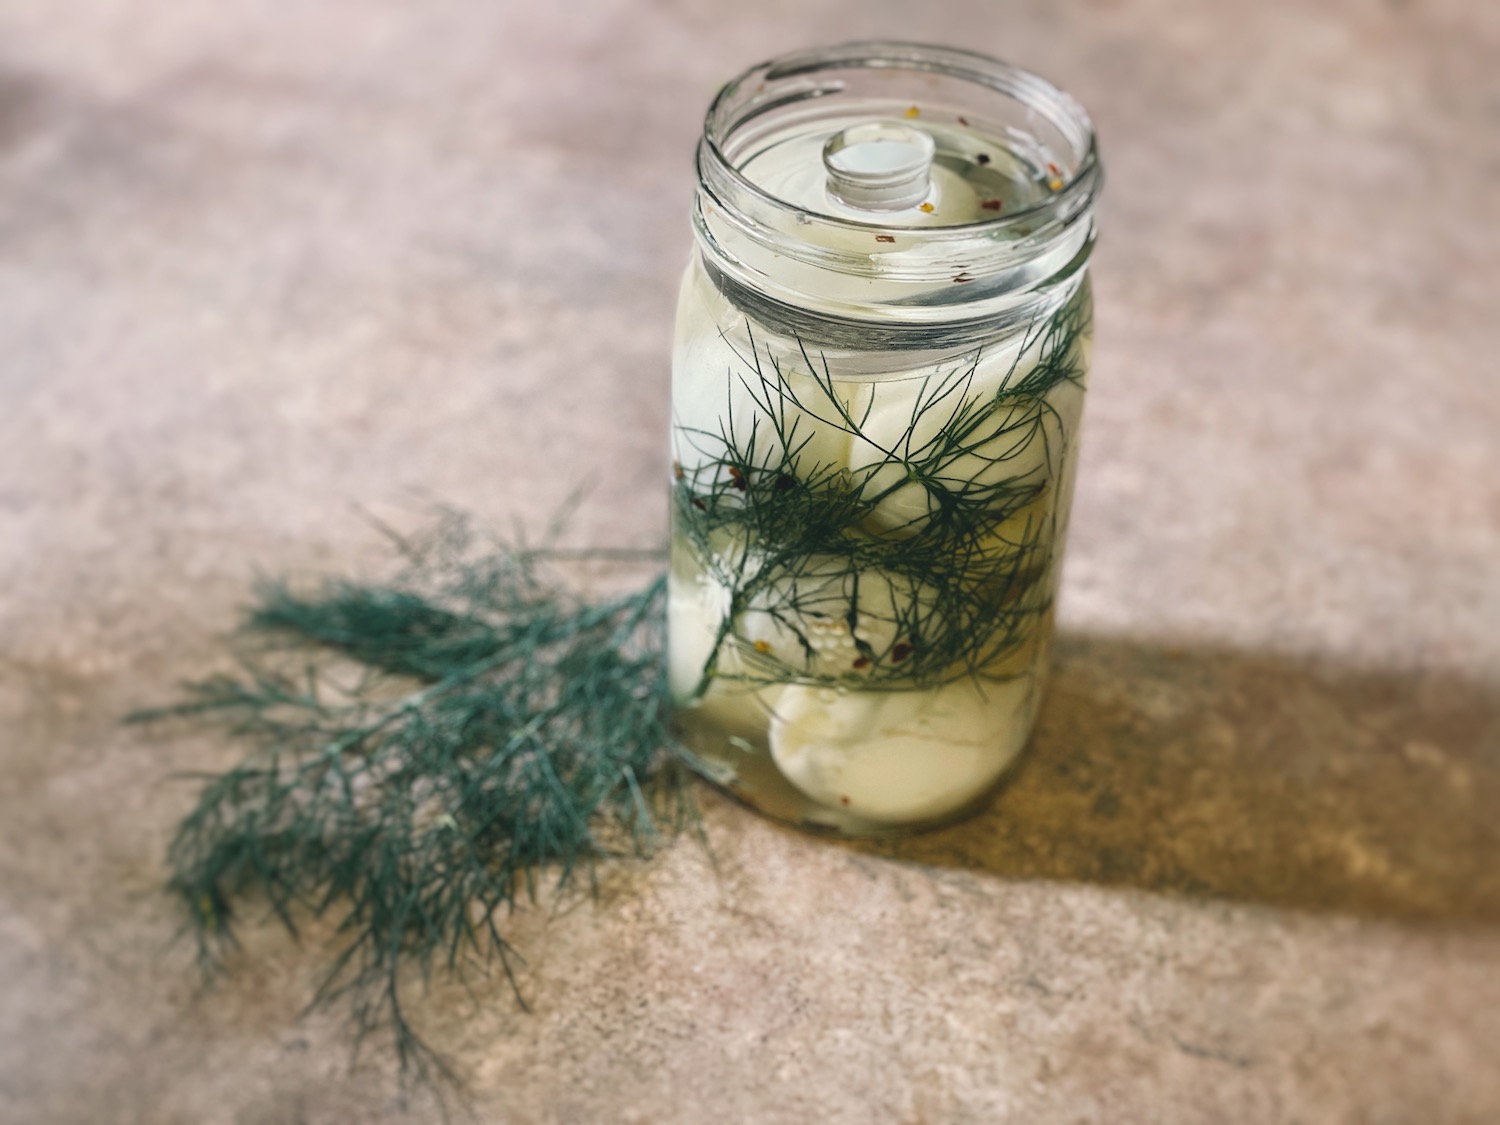 Fermented eggs in a glass quart mason jar with a sprig of dill next to it.